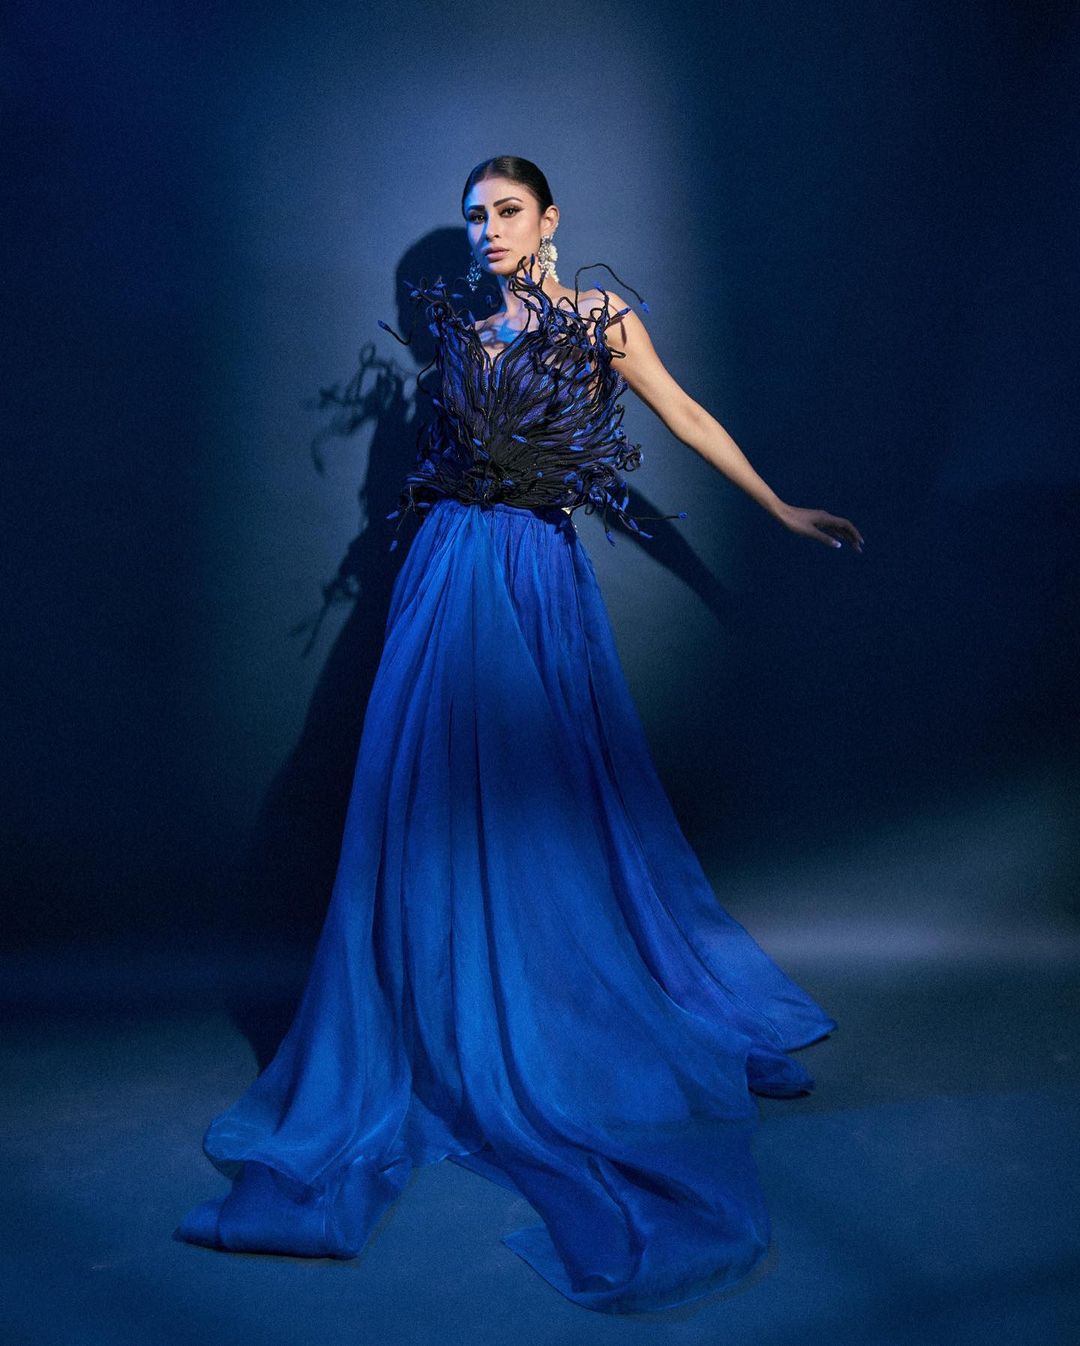 mouni-roy-gorgeous-looks-in-amazing-blue-out-fit